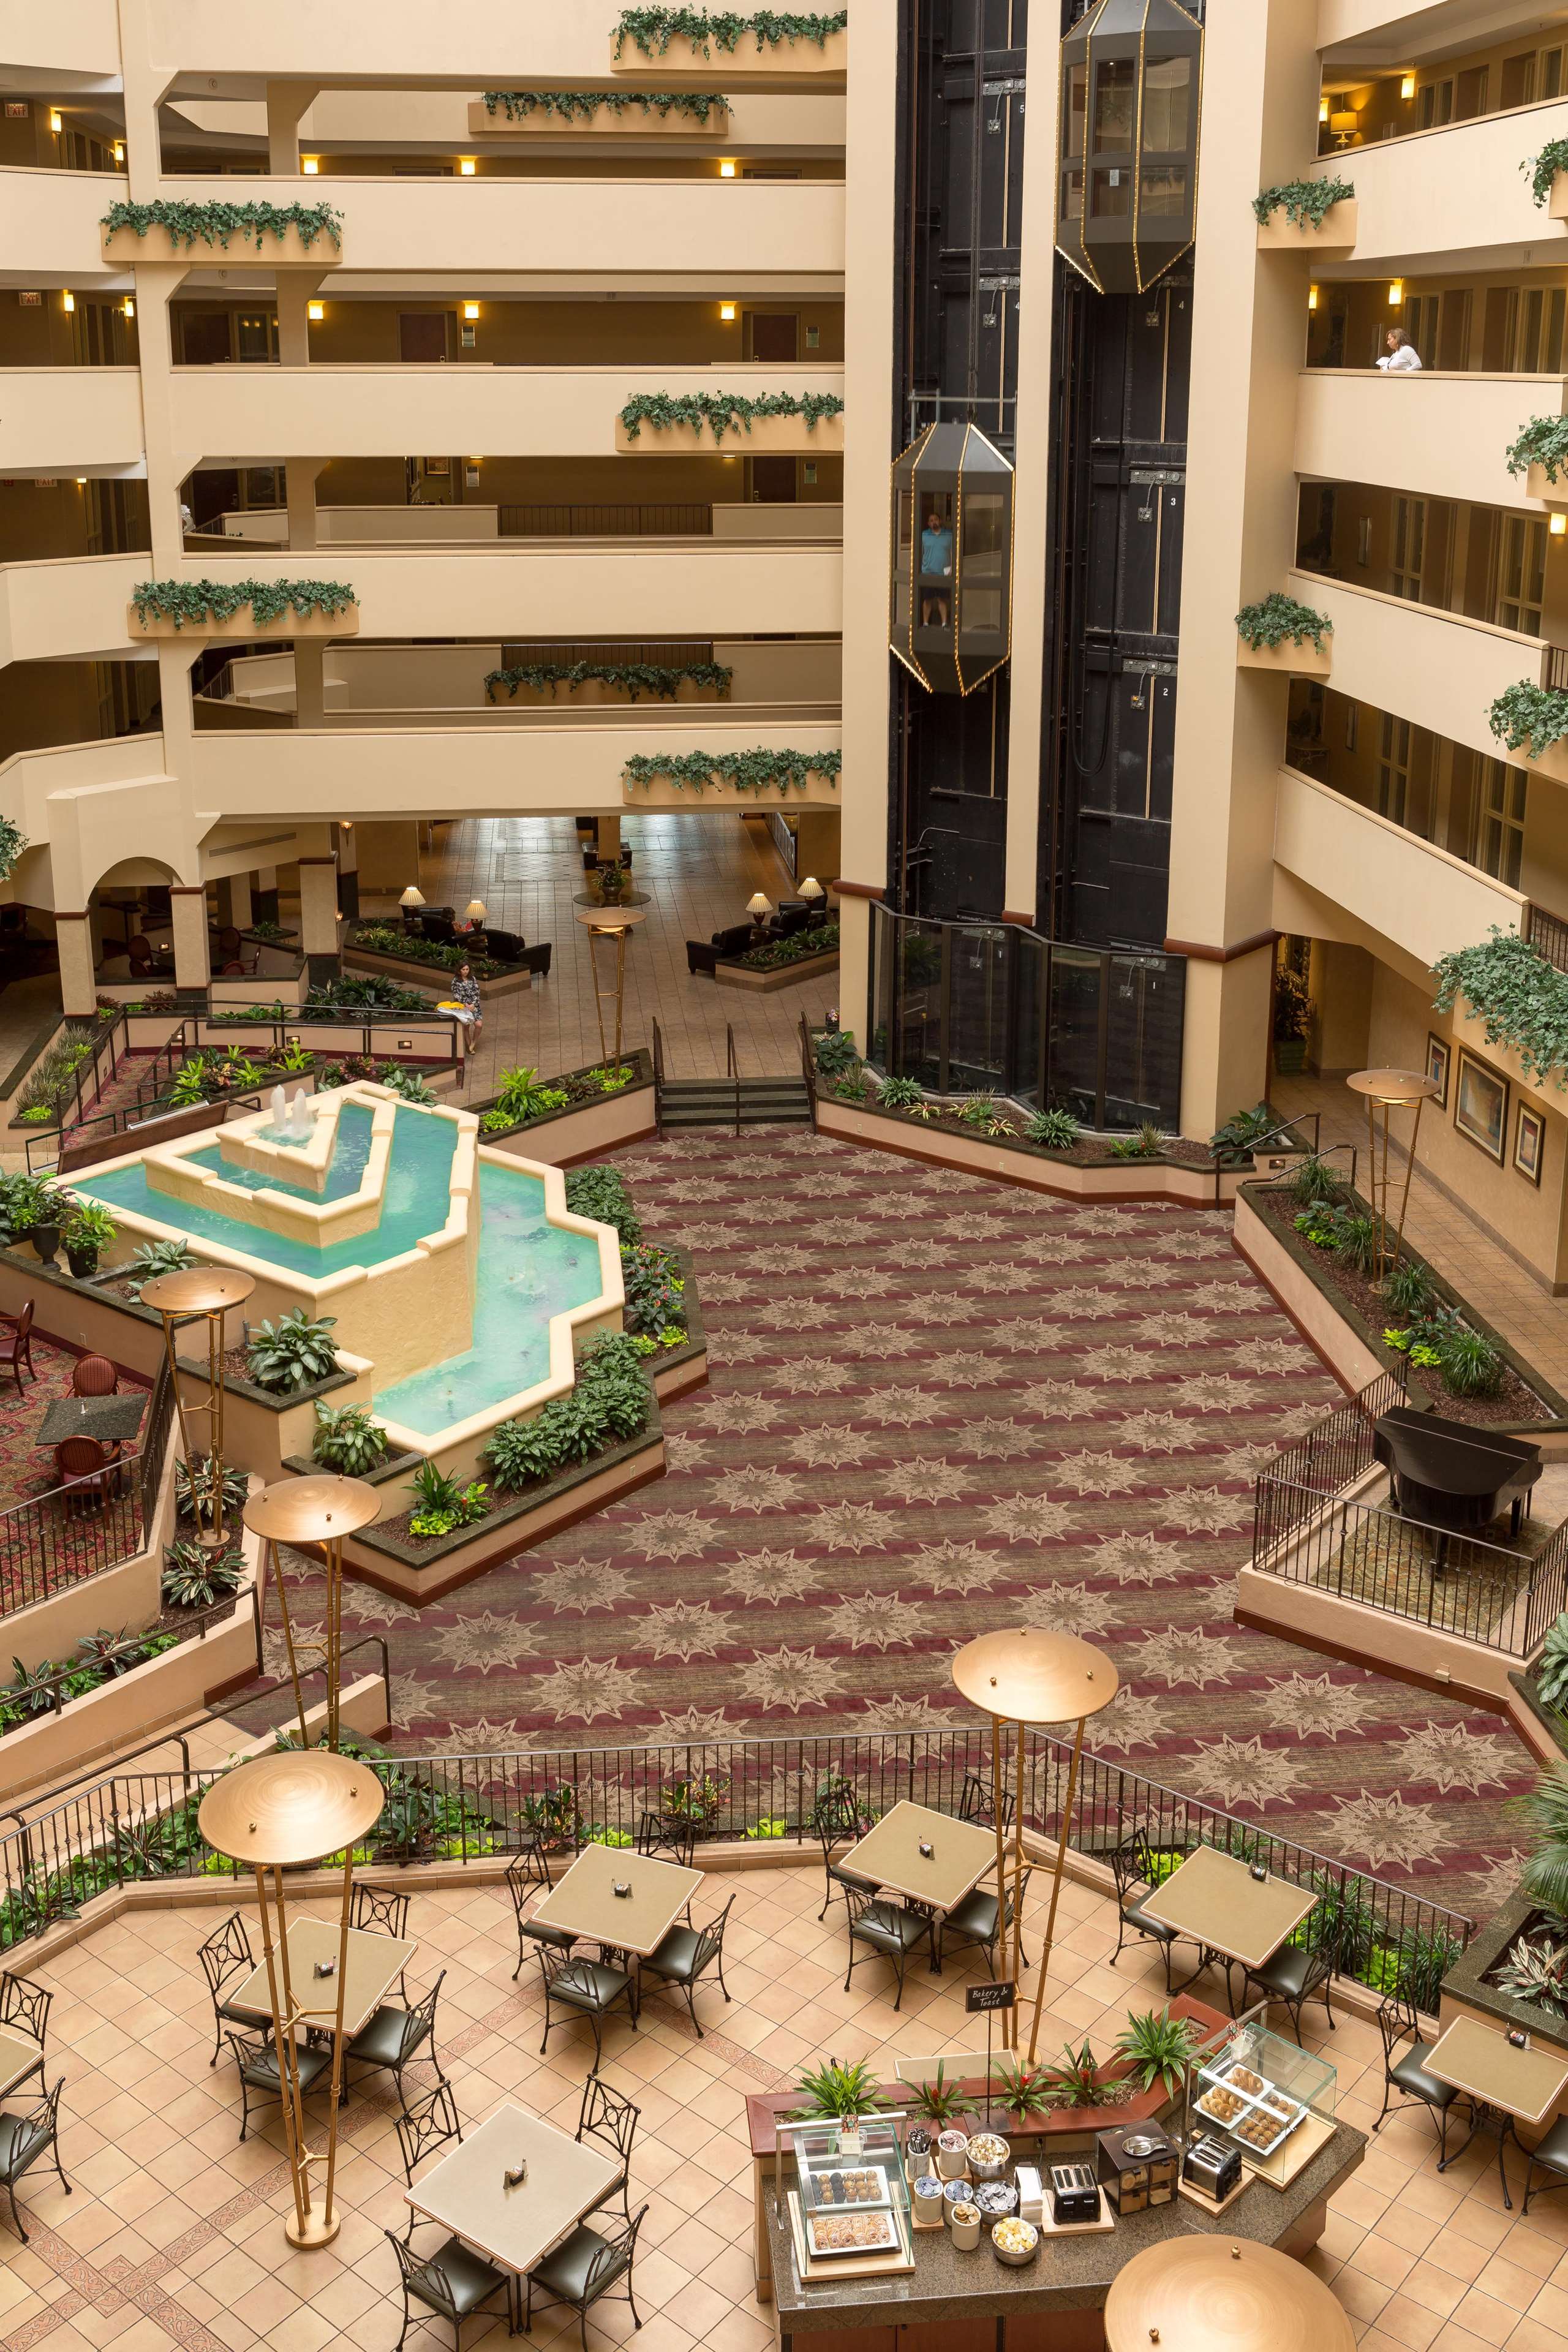 Embassy Suites by Hilton Columbia Greystone Photo